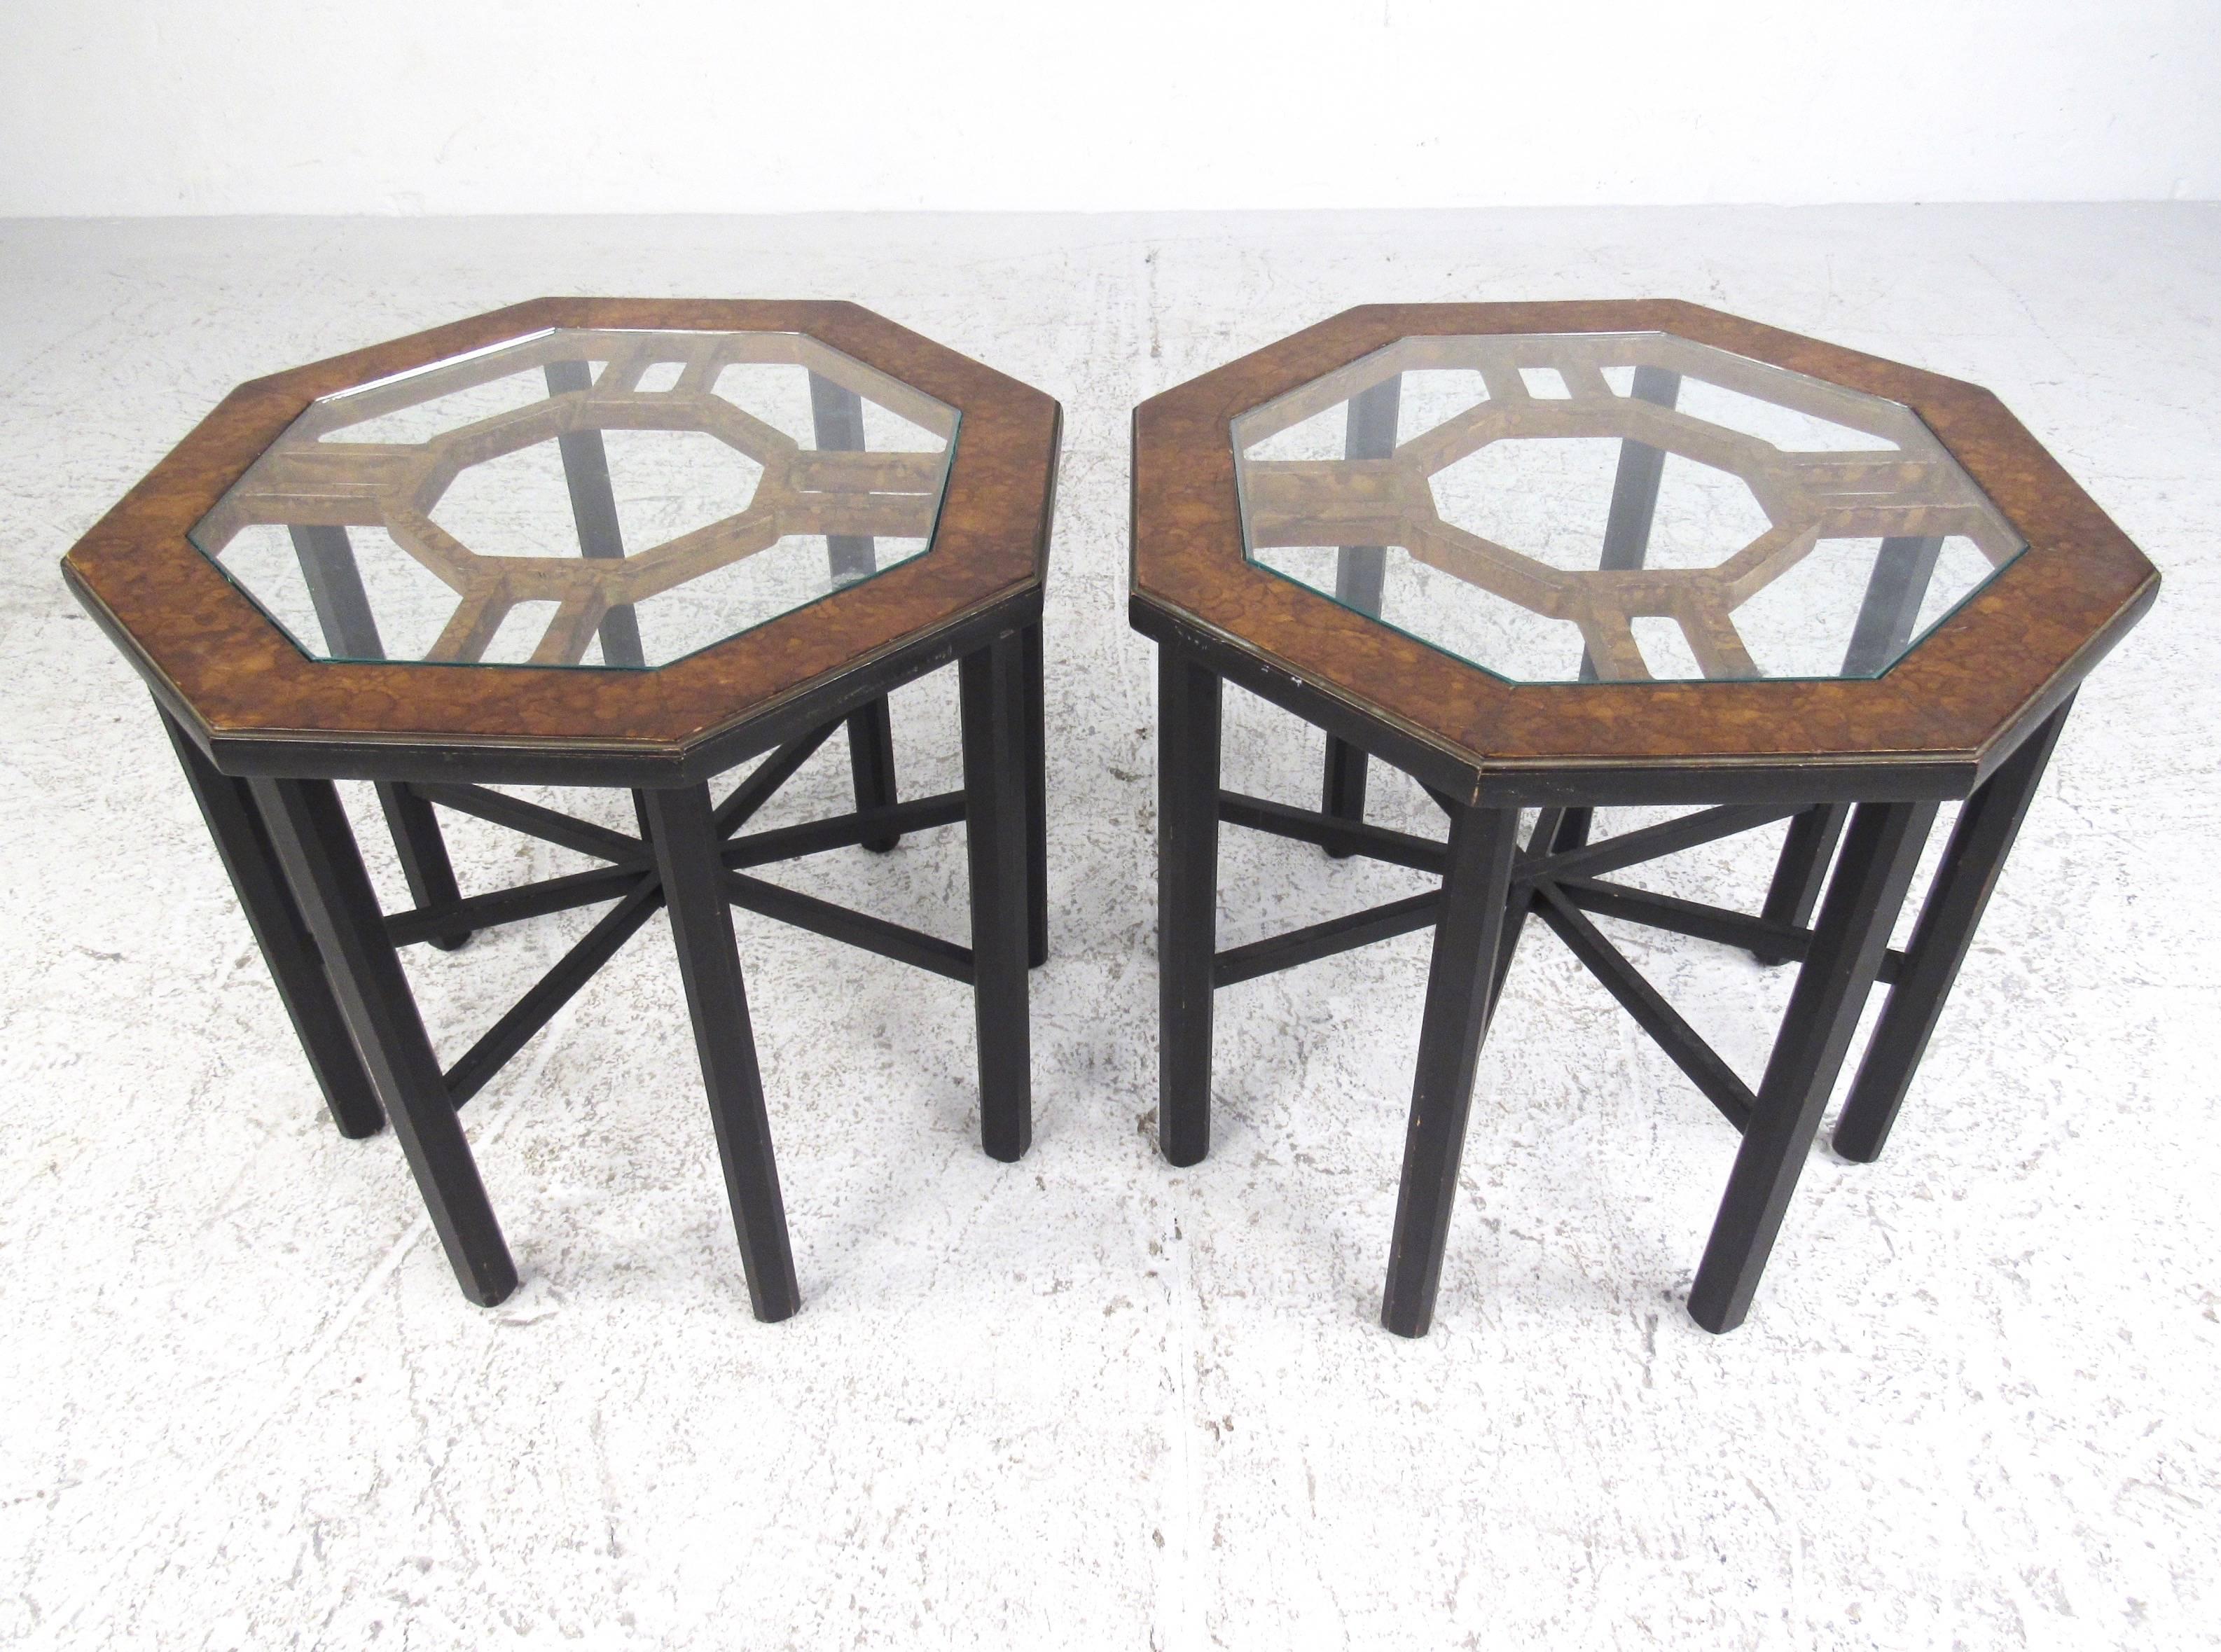 This elegant pair of Mastercraft style Mid-Century end tables features intricate eight legged octagonal design. Burl wood tops with inset glass look great in any seating setting, for home or business. Ebonized base features unique star-like